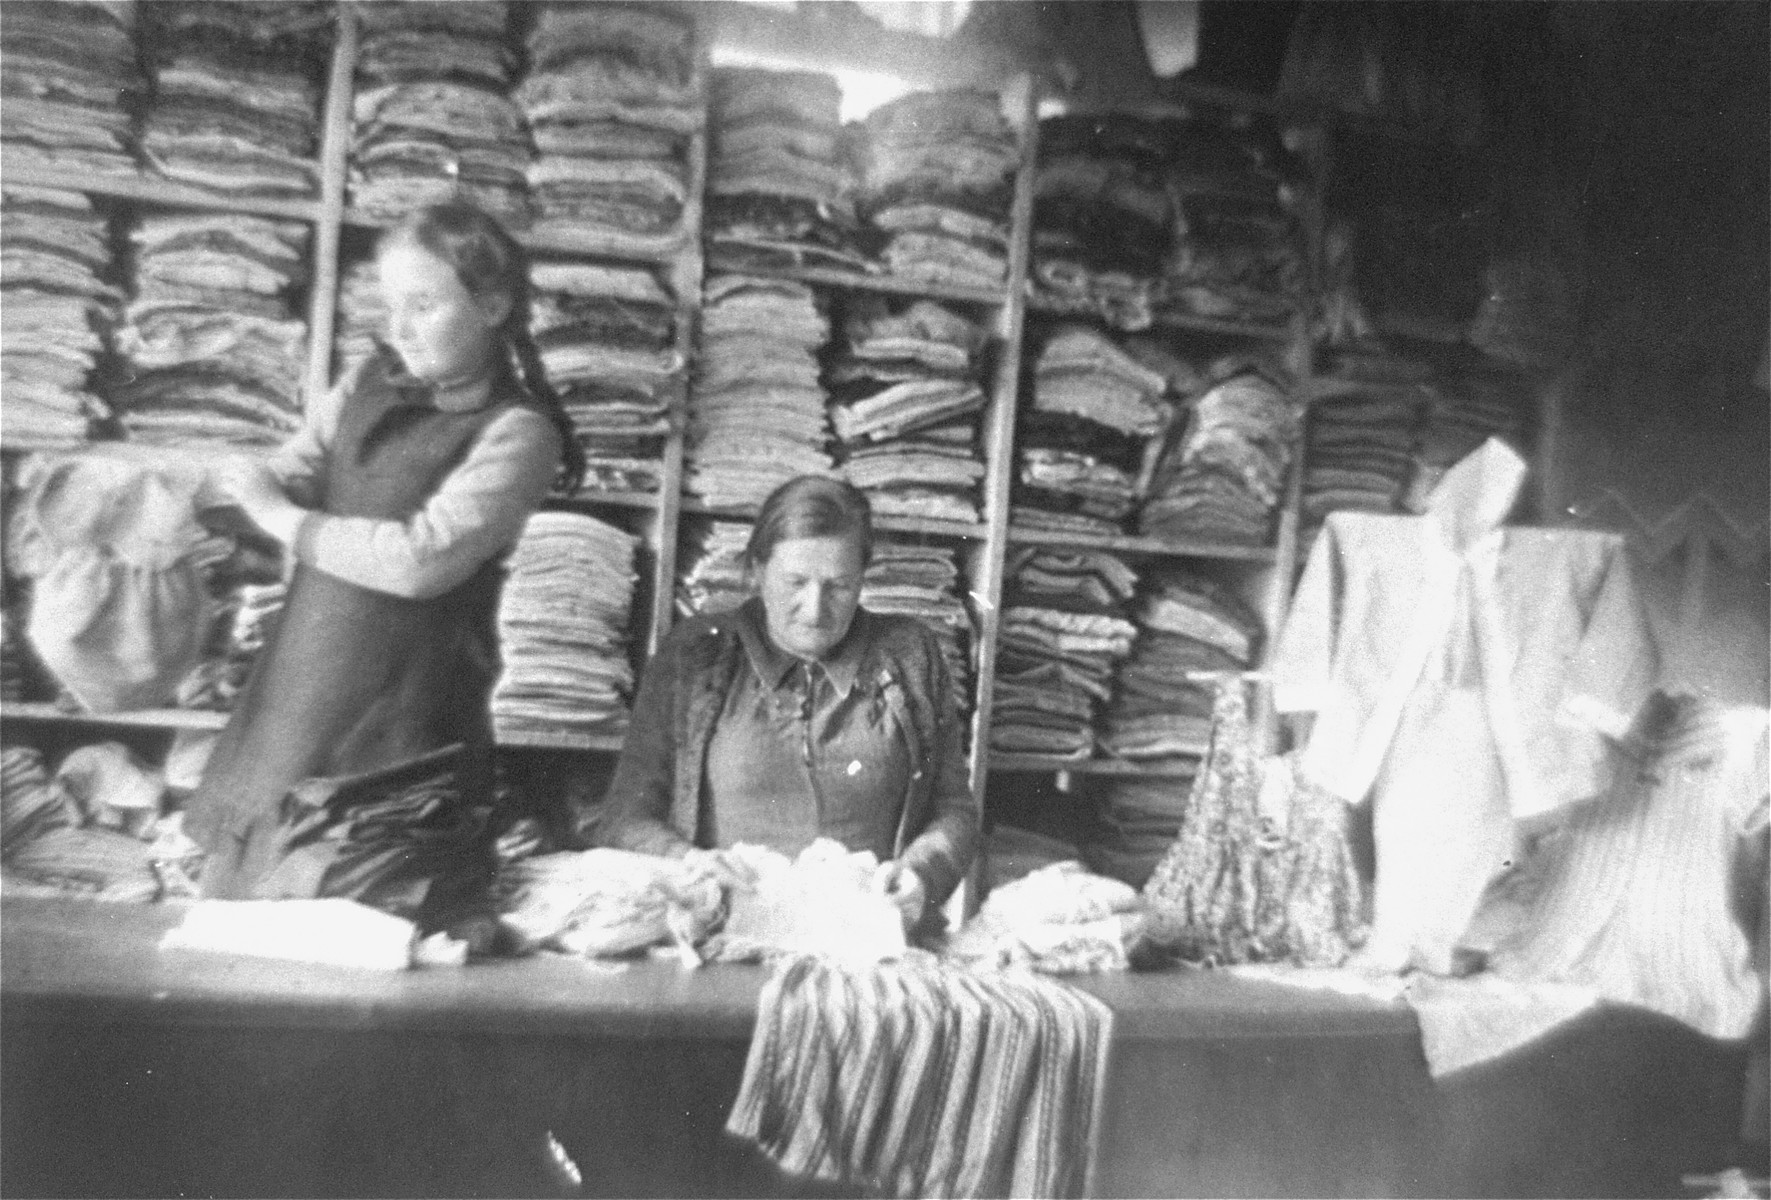 A Jewish woman and girl work in a clothing warehouse in the Glubokoye ghetto.  

Among those pictured is Rajze Lederman.